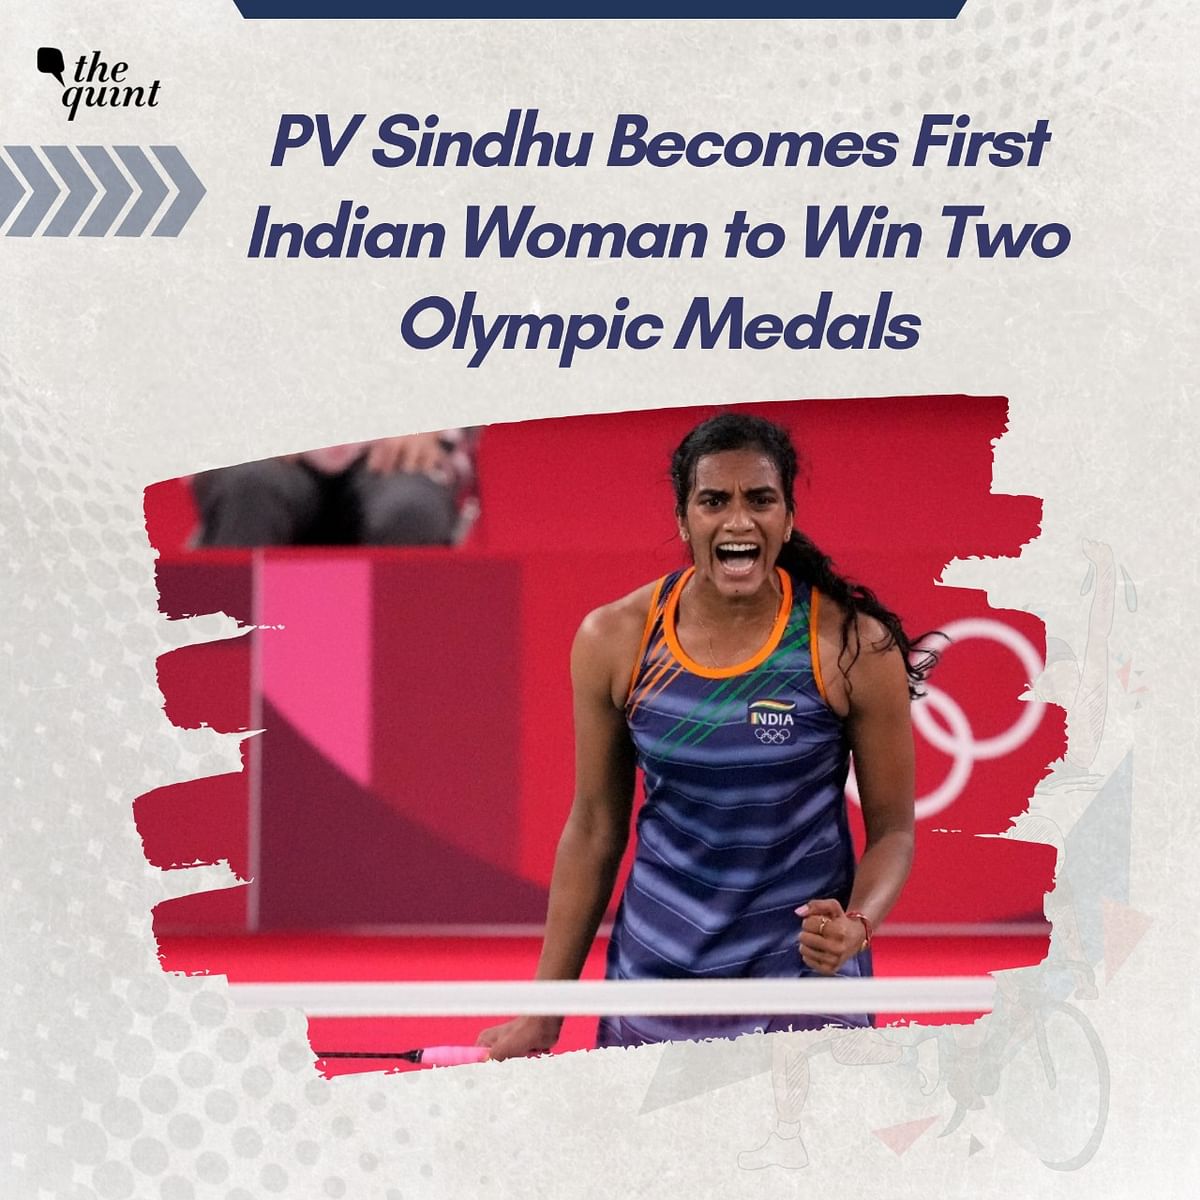 PV Sindhu becomes the first Indian female athlete to win 2 Olympic medals.  